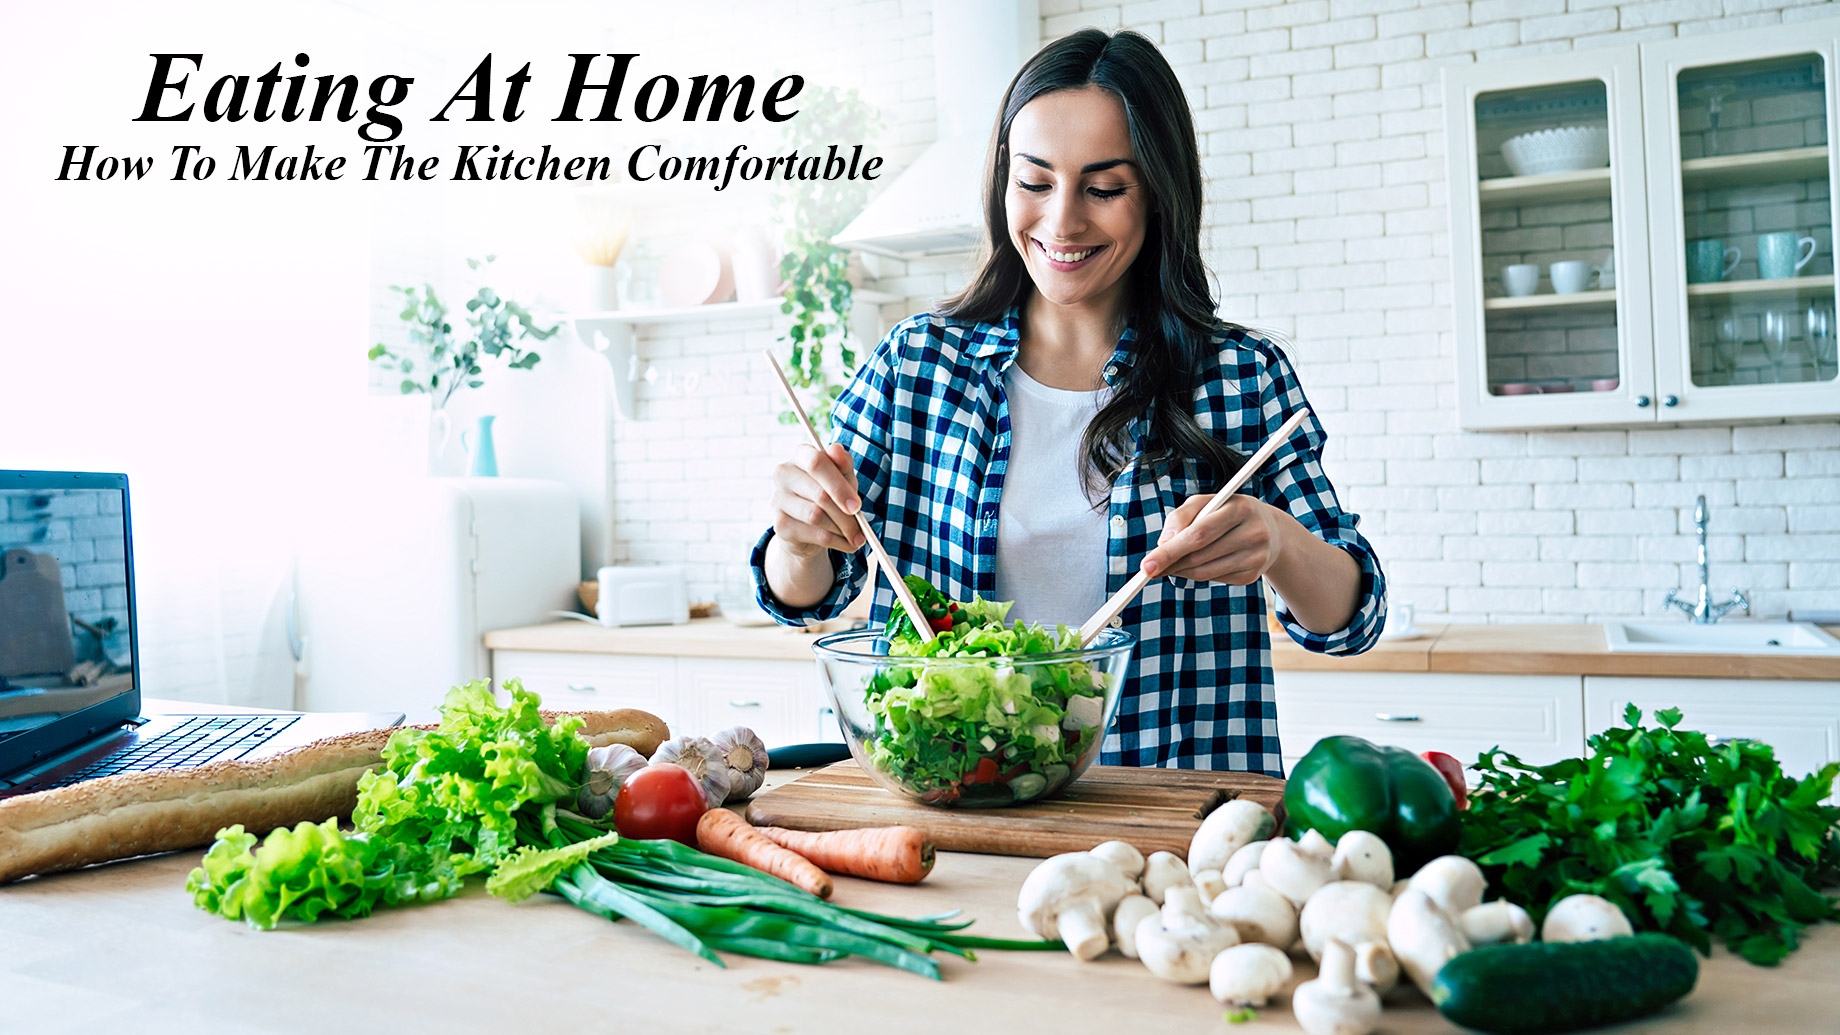 Eating At Home - How To Make The Kitchen Comfortable